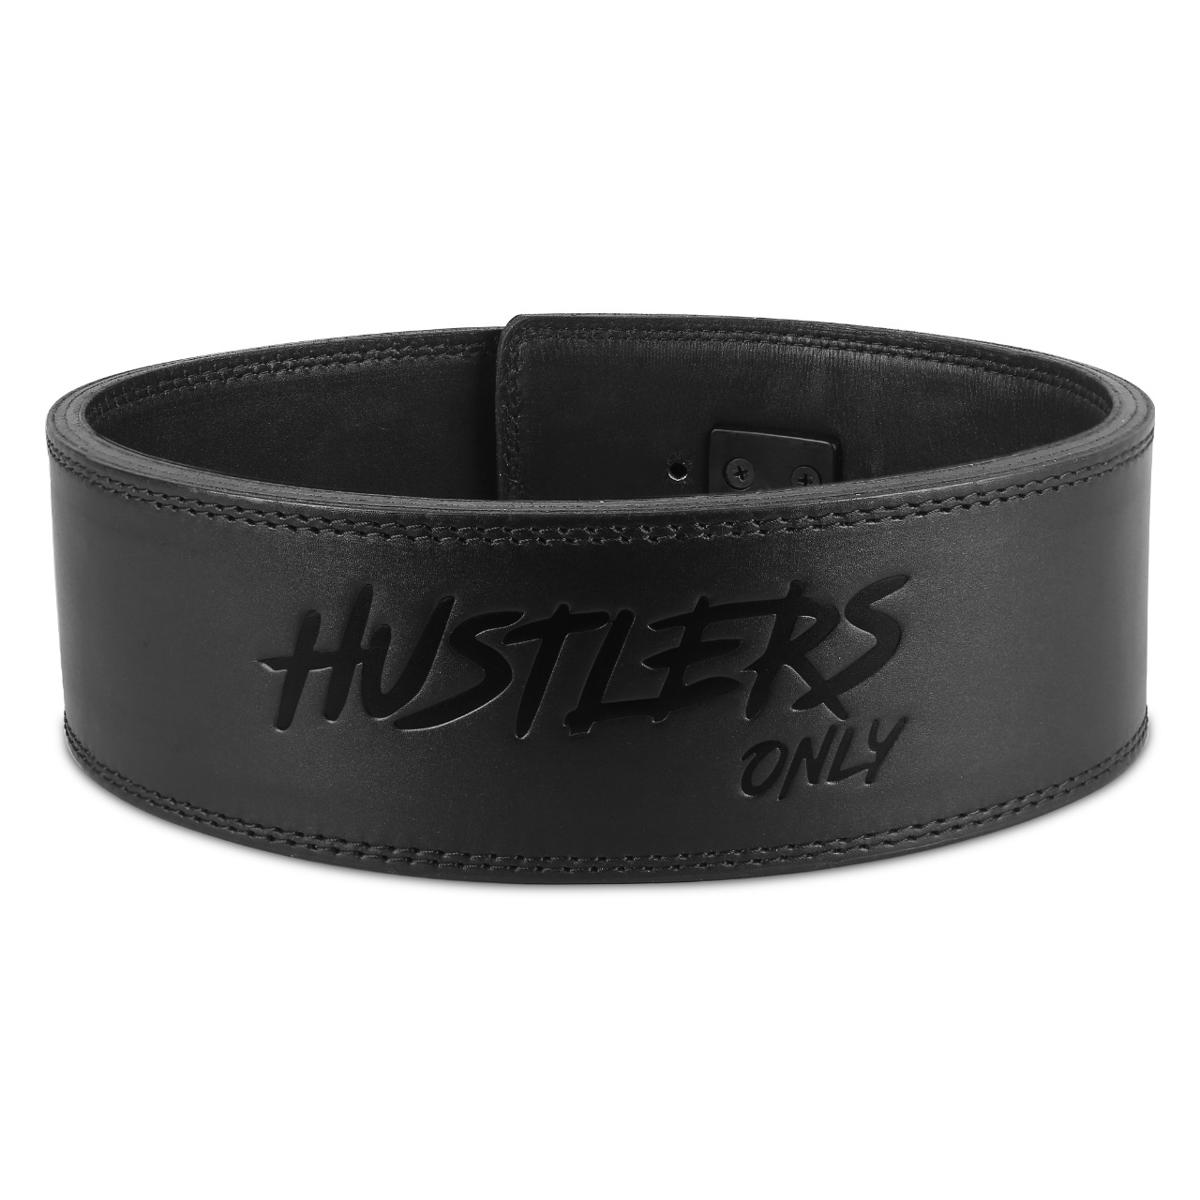 Hustlers Only Official Store in Pakistan - daraz.pk